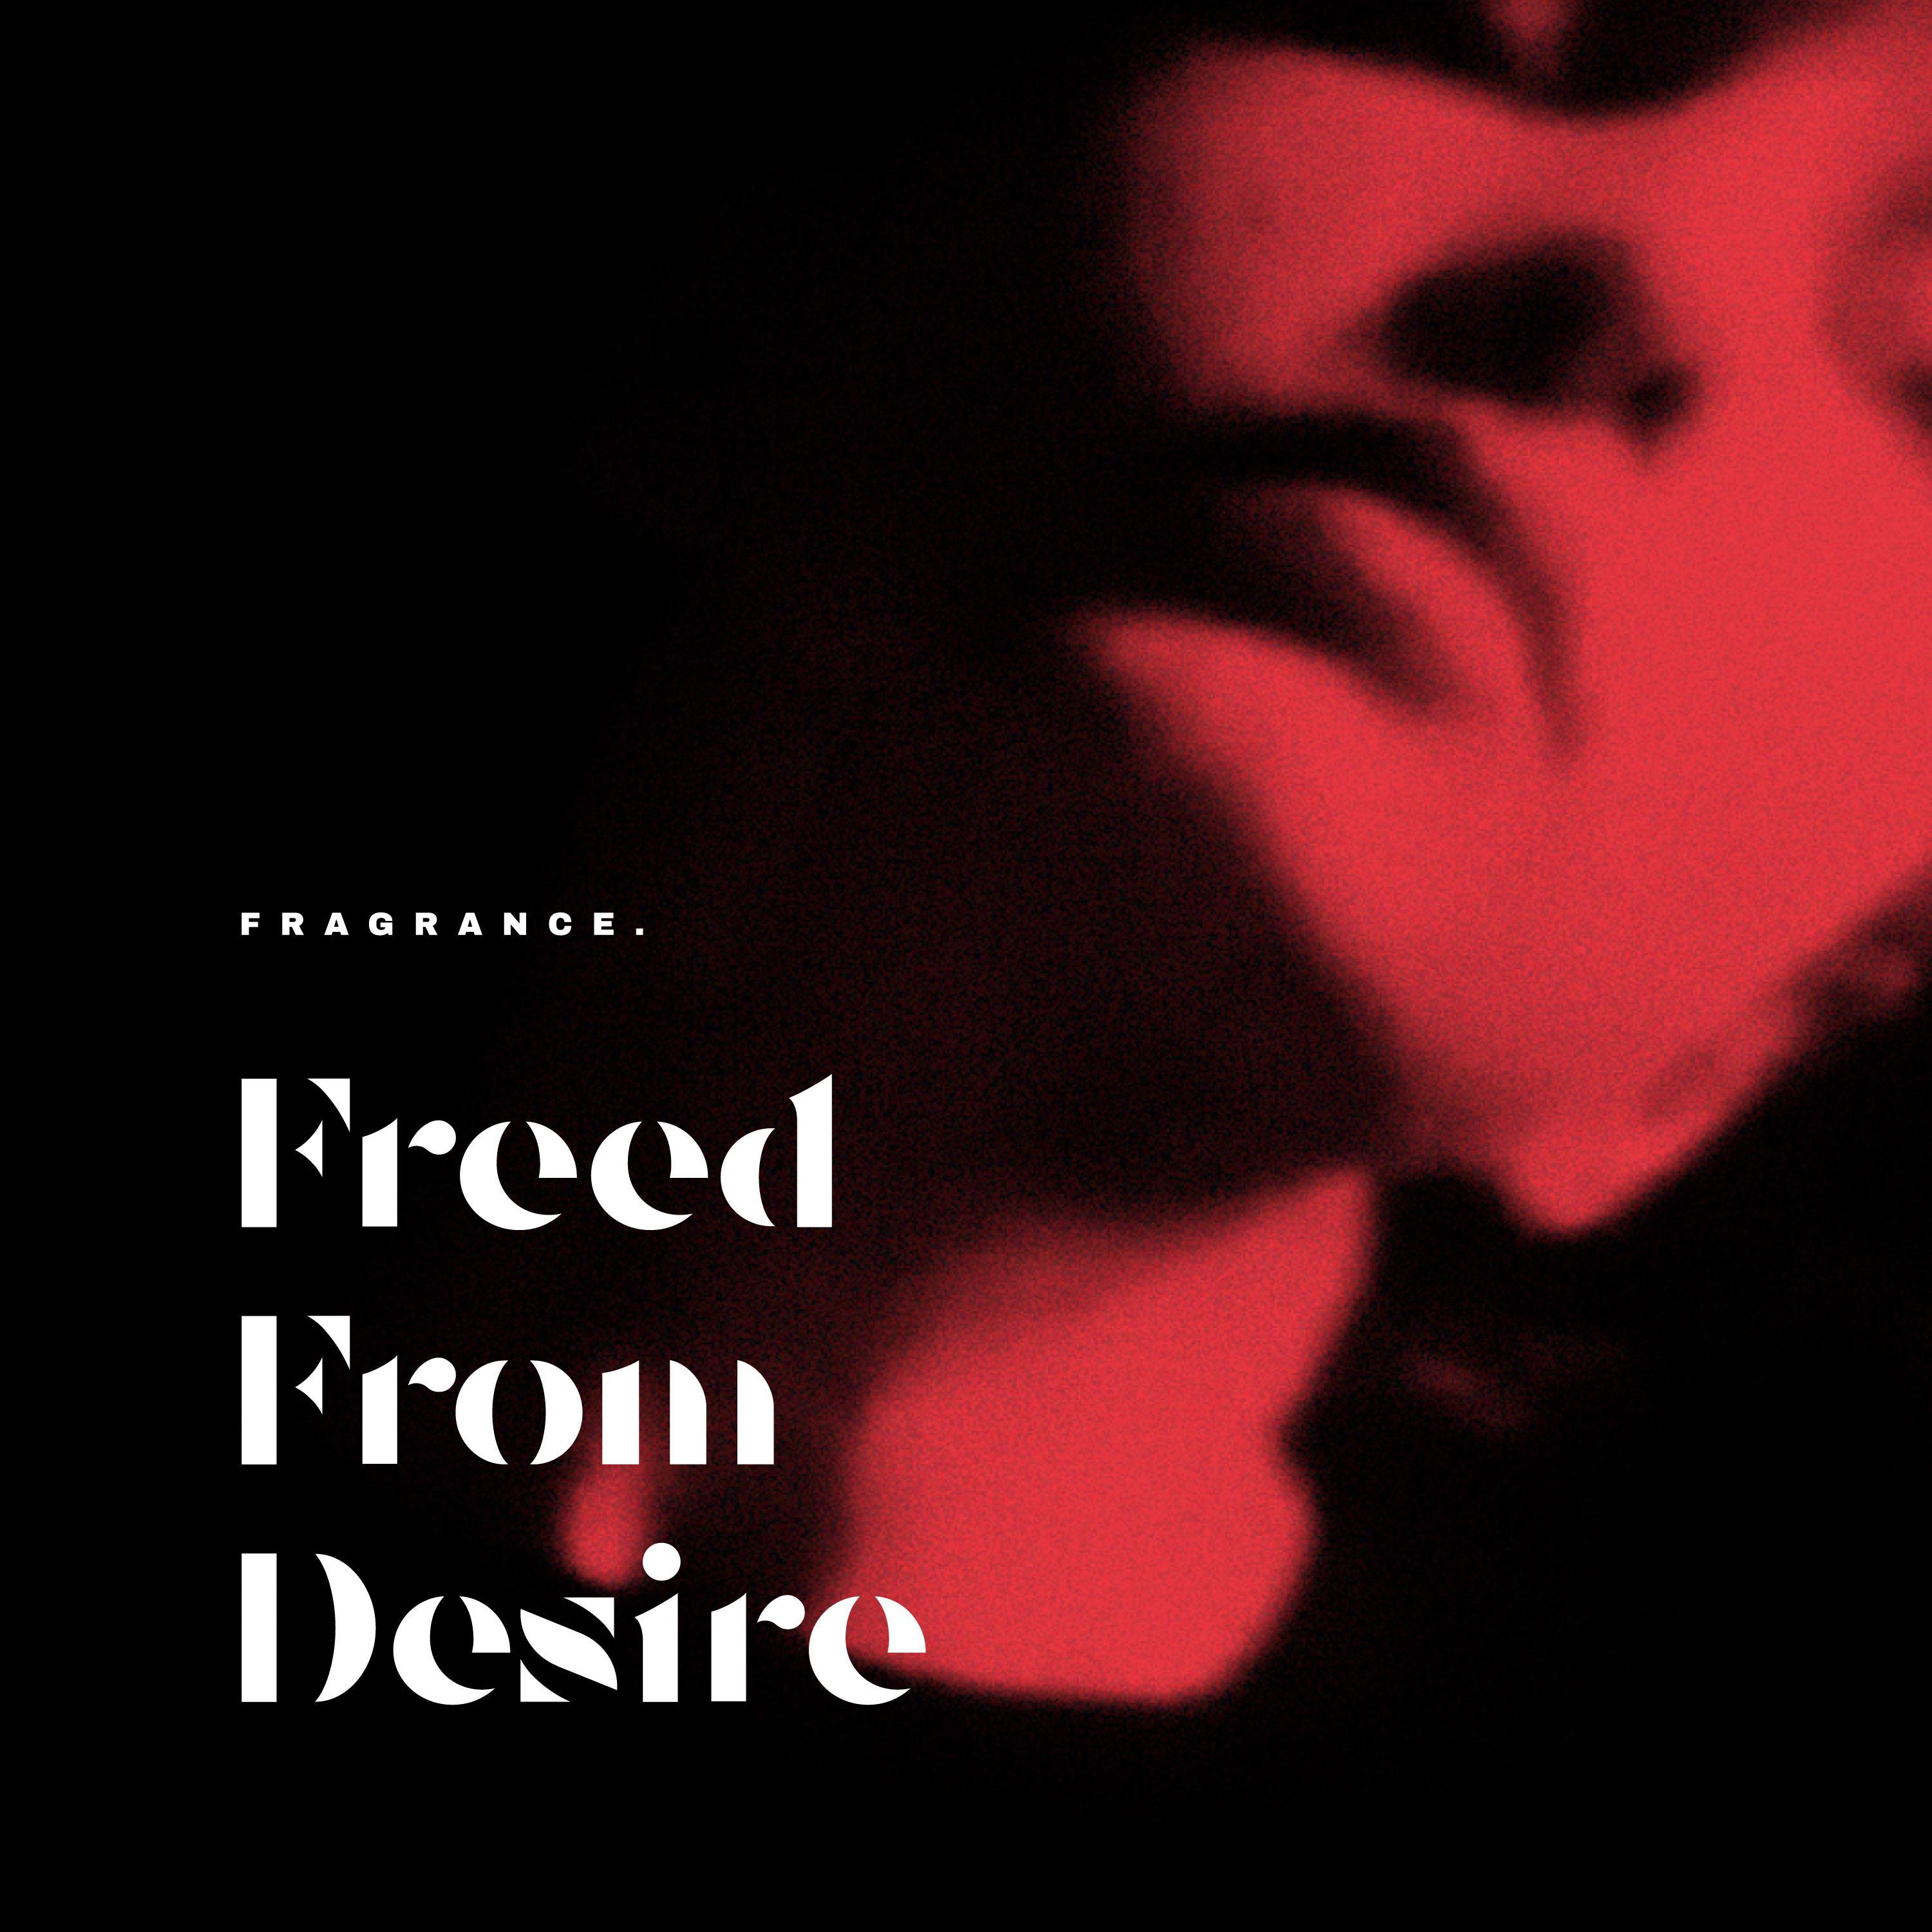 Fragrance - Freed From Desire